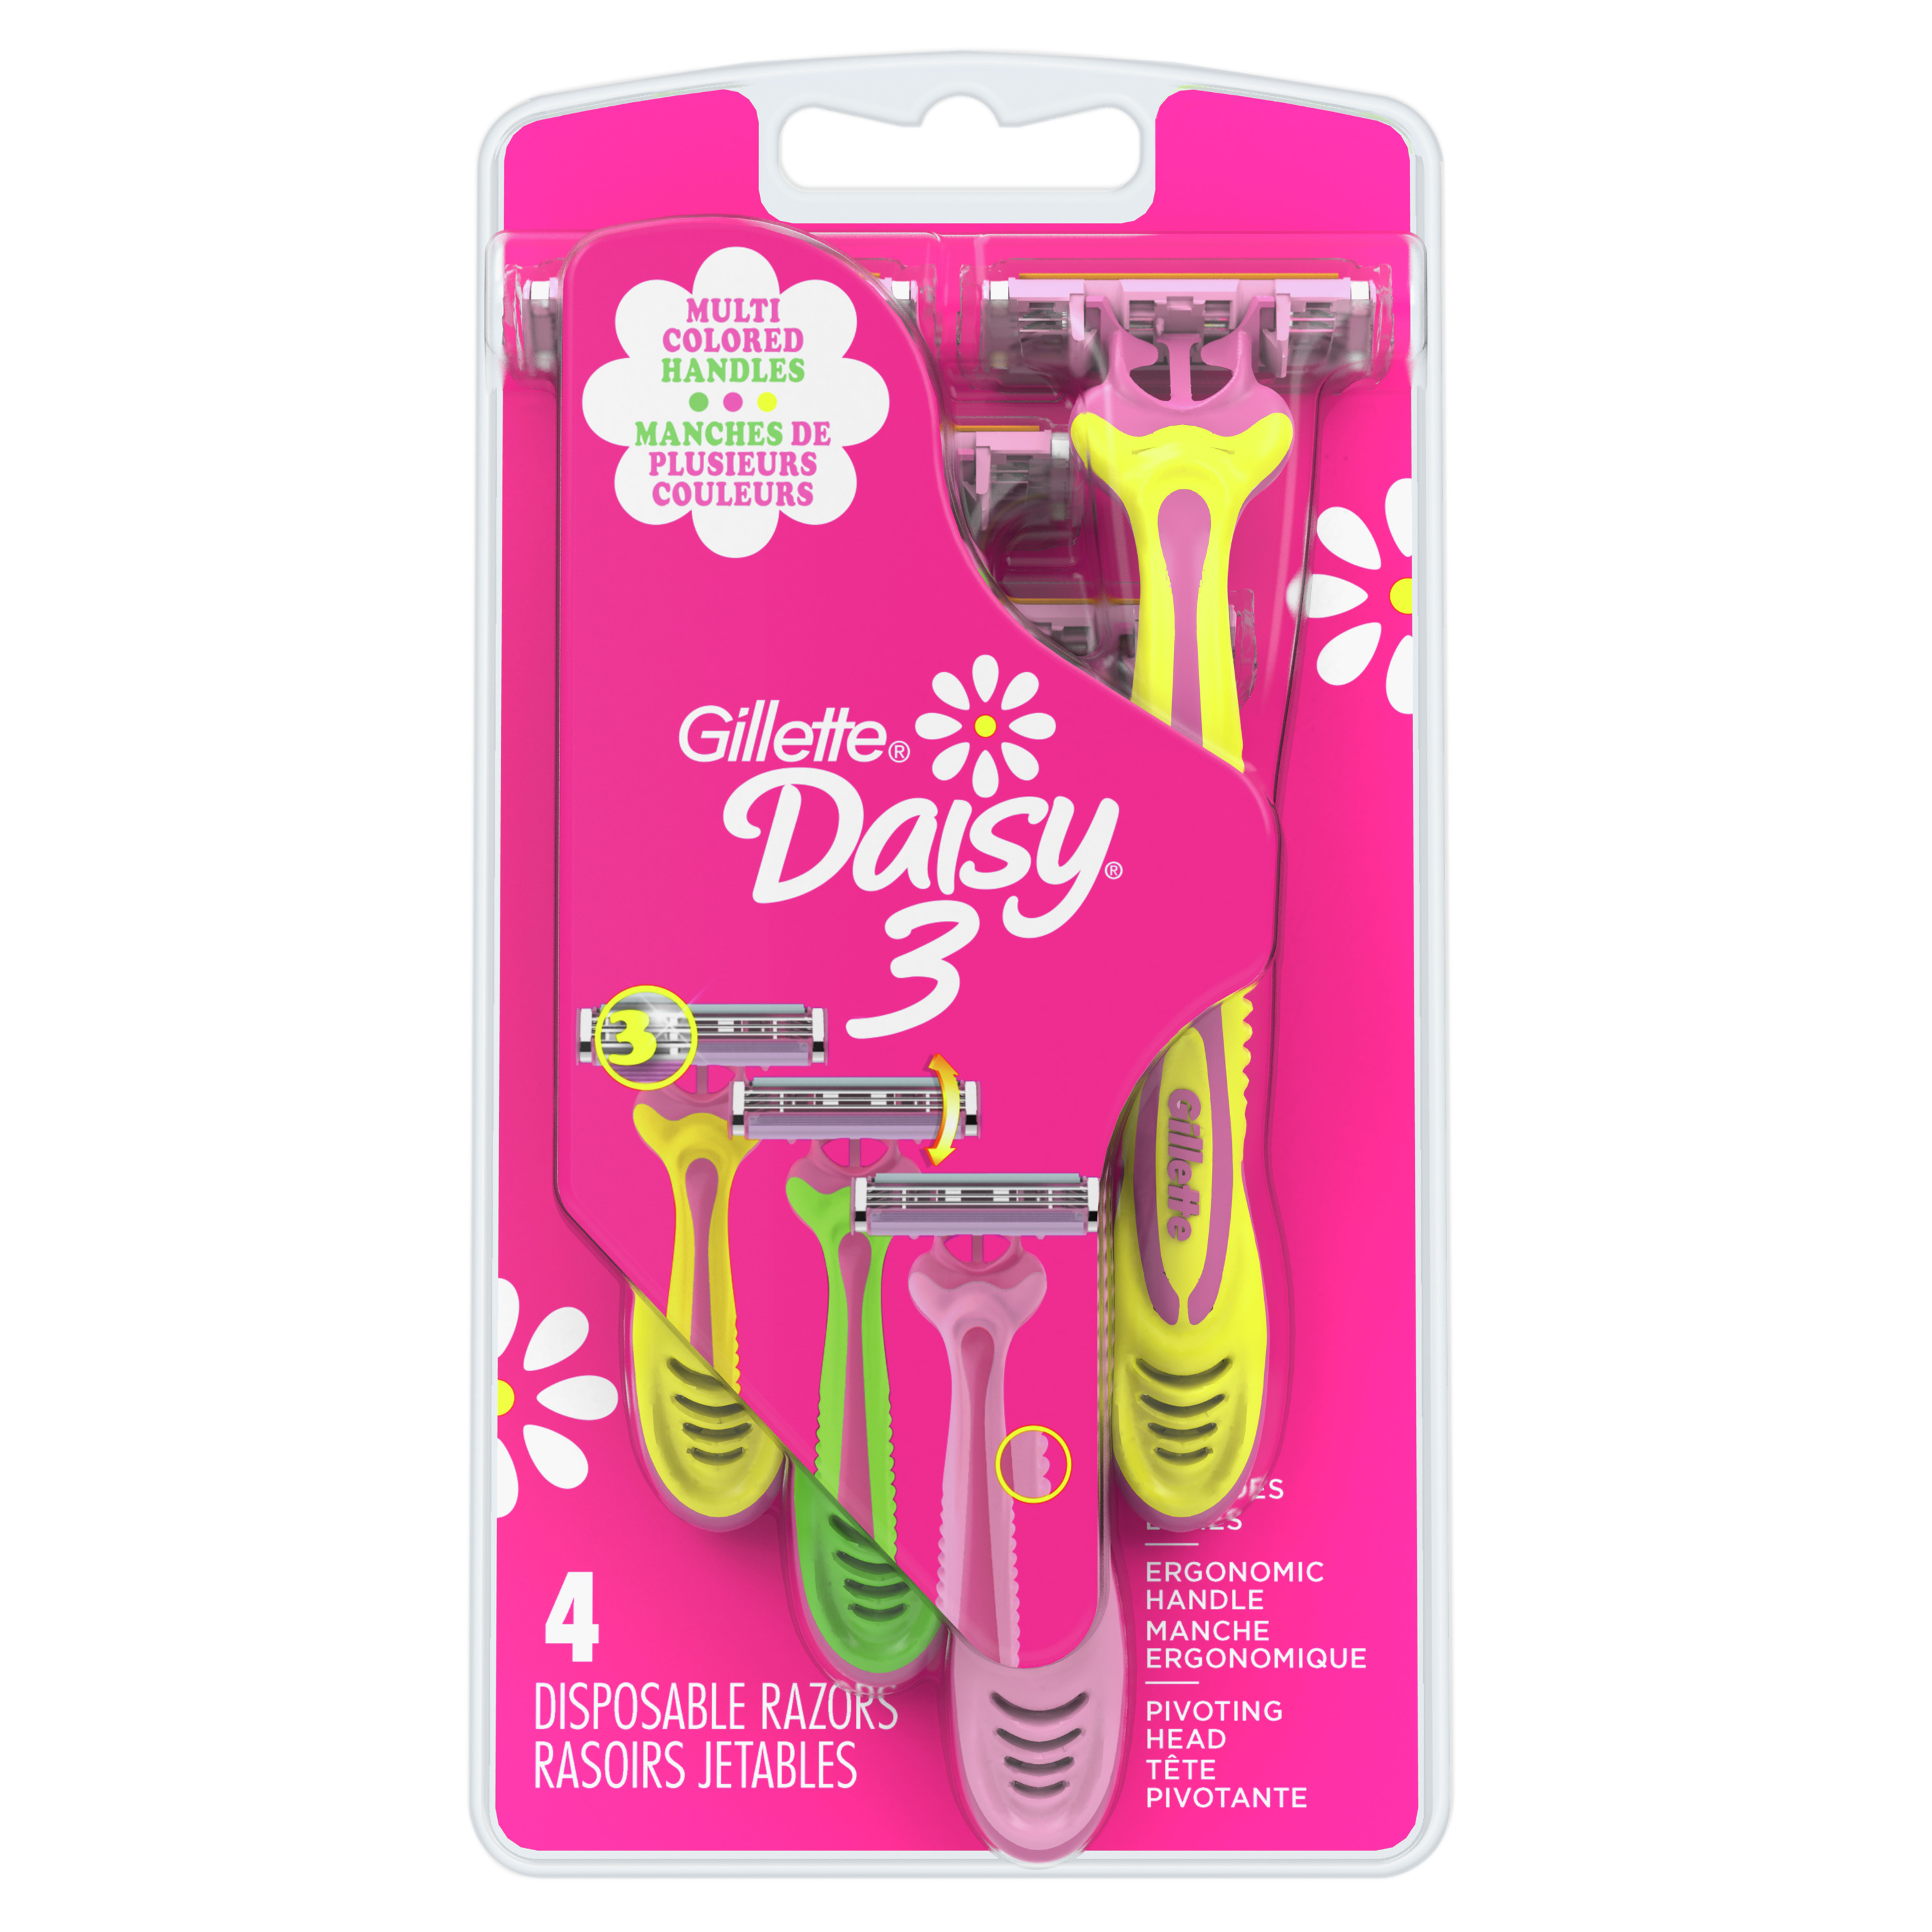 Daisy Gillette Disposable Razors for Women, 3 Bladed, 4 Ct - image 1 of 7